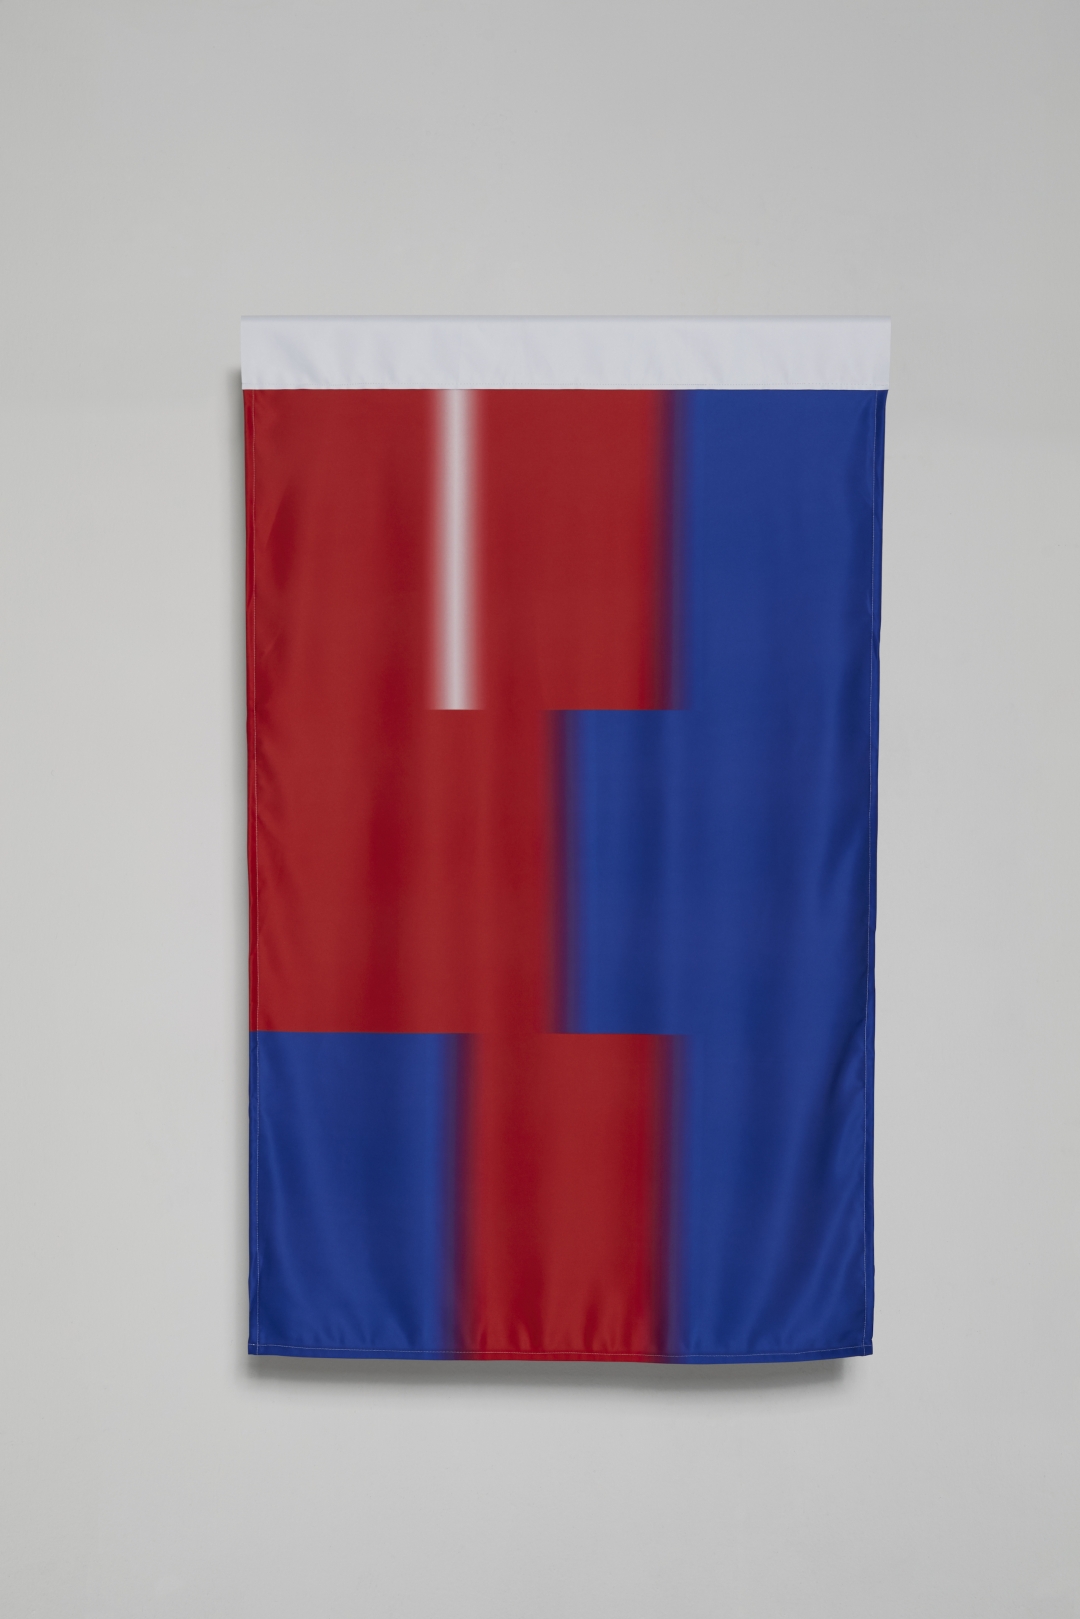 Boedi Widjaja, <i>Art is only a continuation of war by other means (flags)</i>, 2019, Series of 10 dye-sublimation printed flags, Each flag: 47 1/4 x 31 1/2 in (120 x 80 cm)